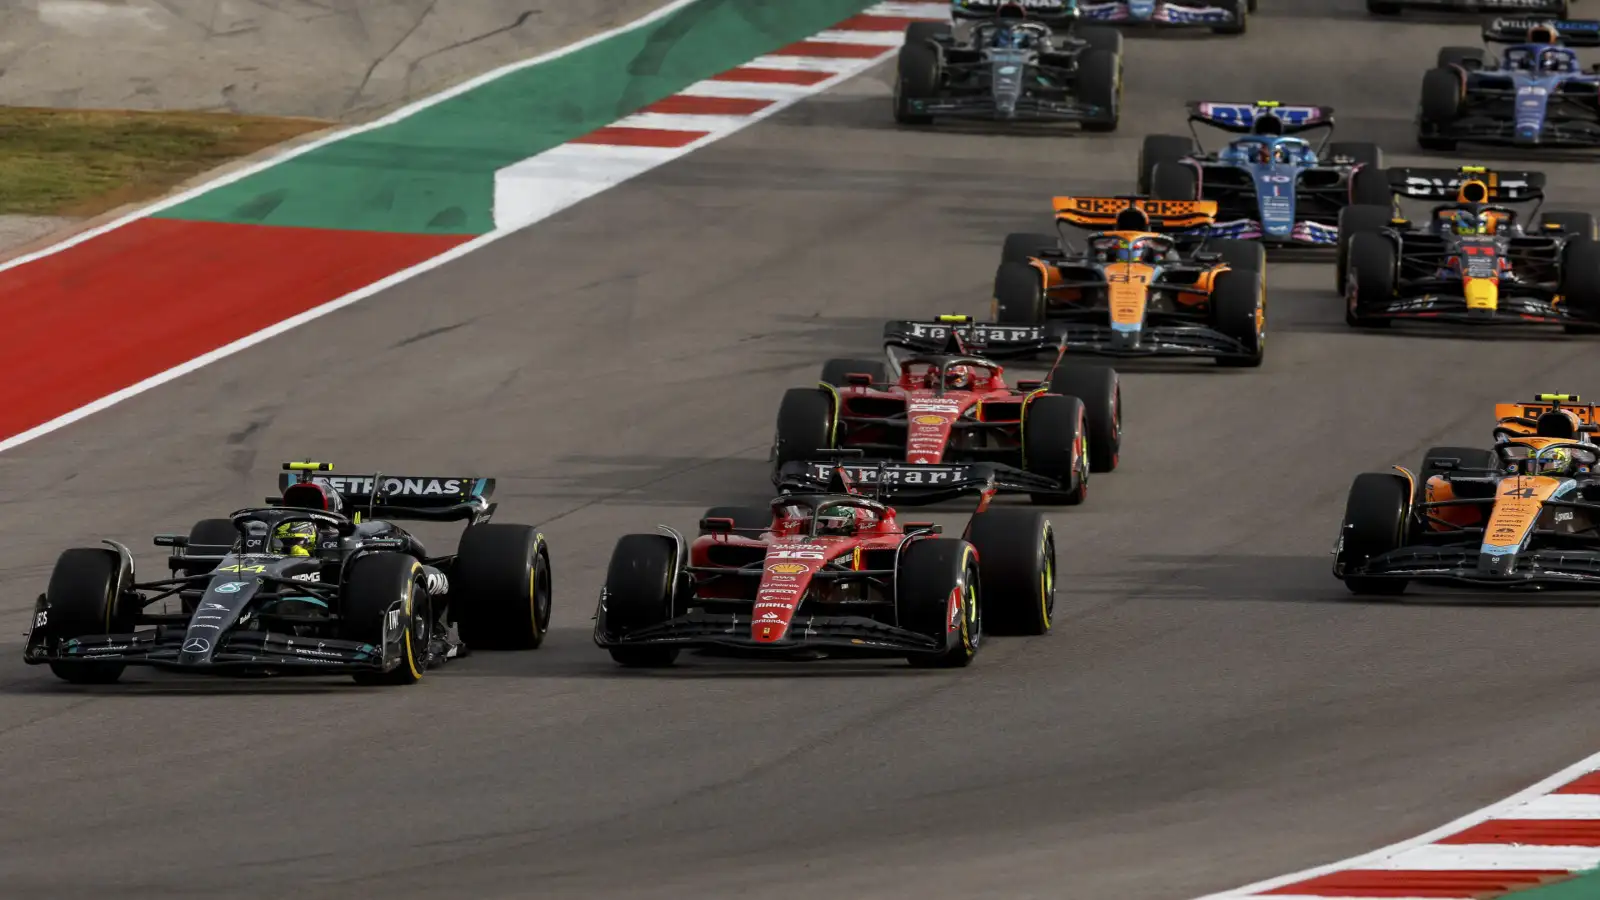 Lewis Hamilton and Charles Leclerc battle for position during the US Grand Prix at the Circuit of the Americas.